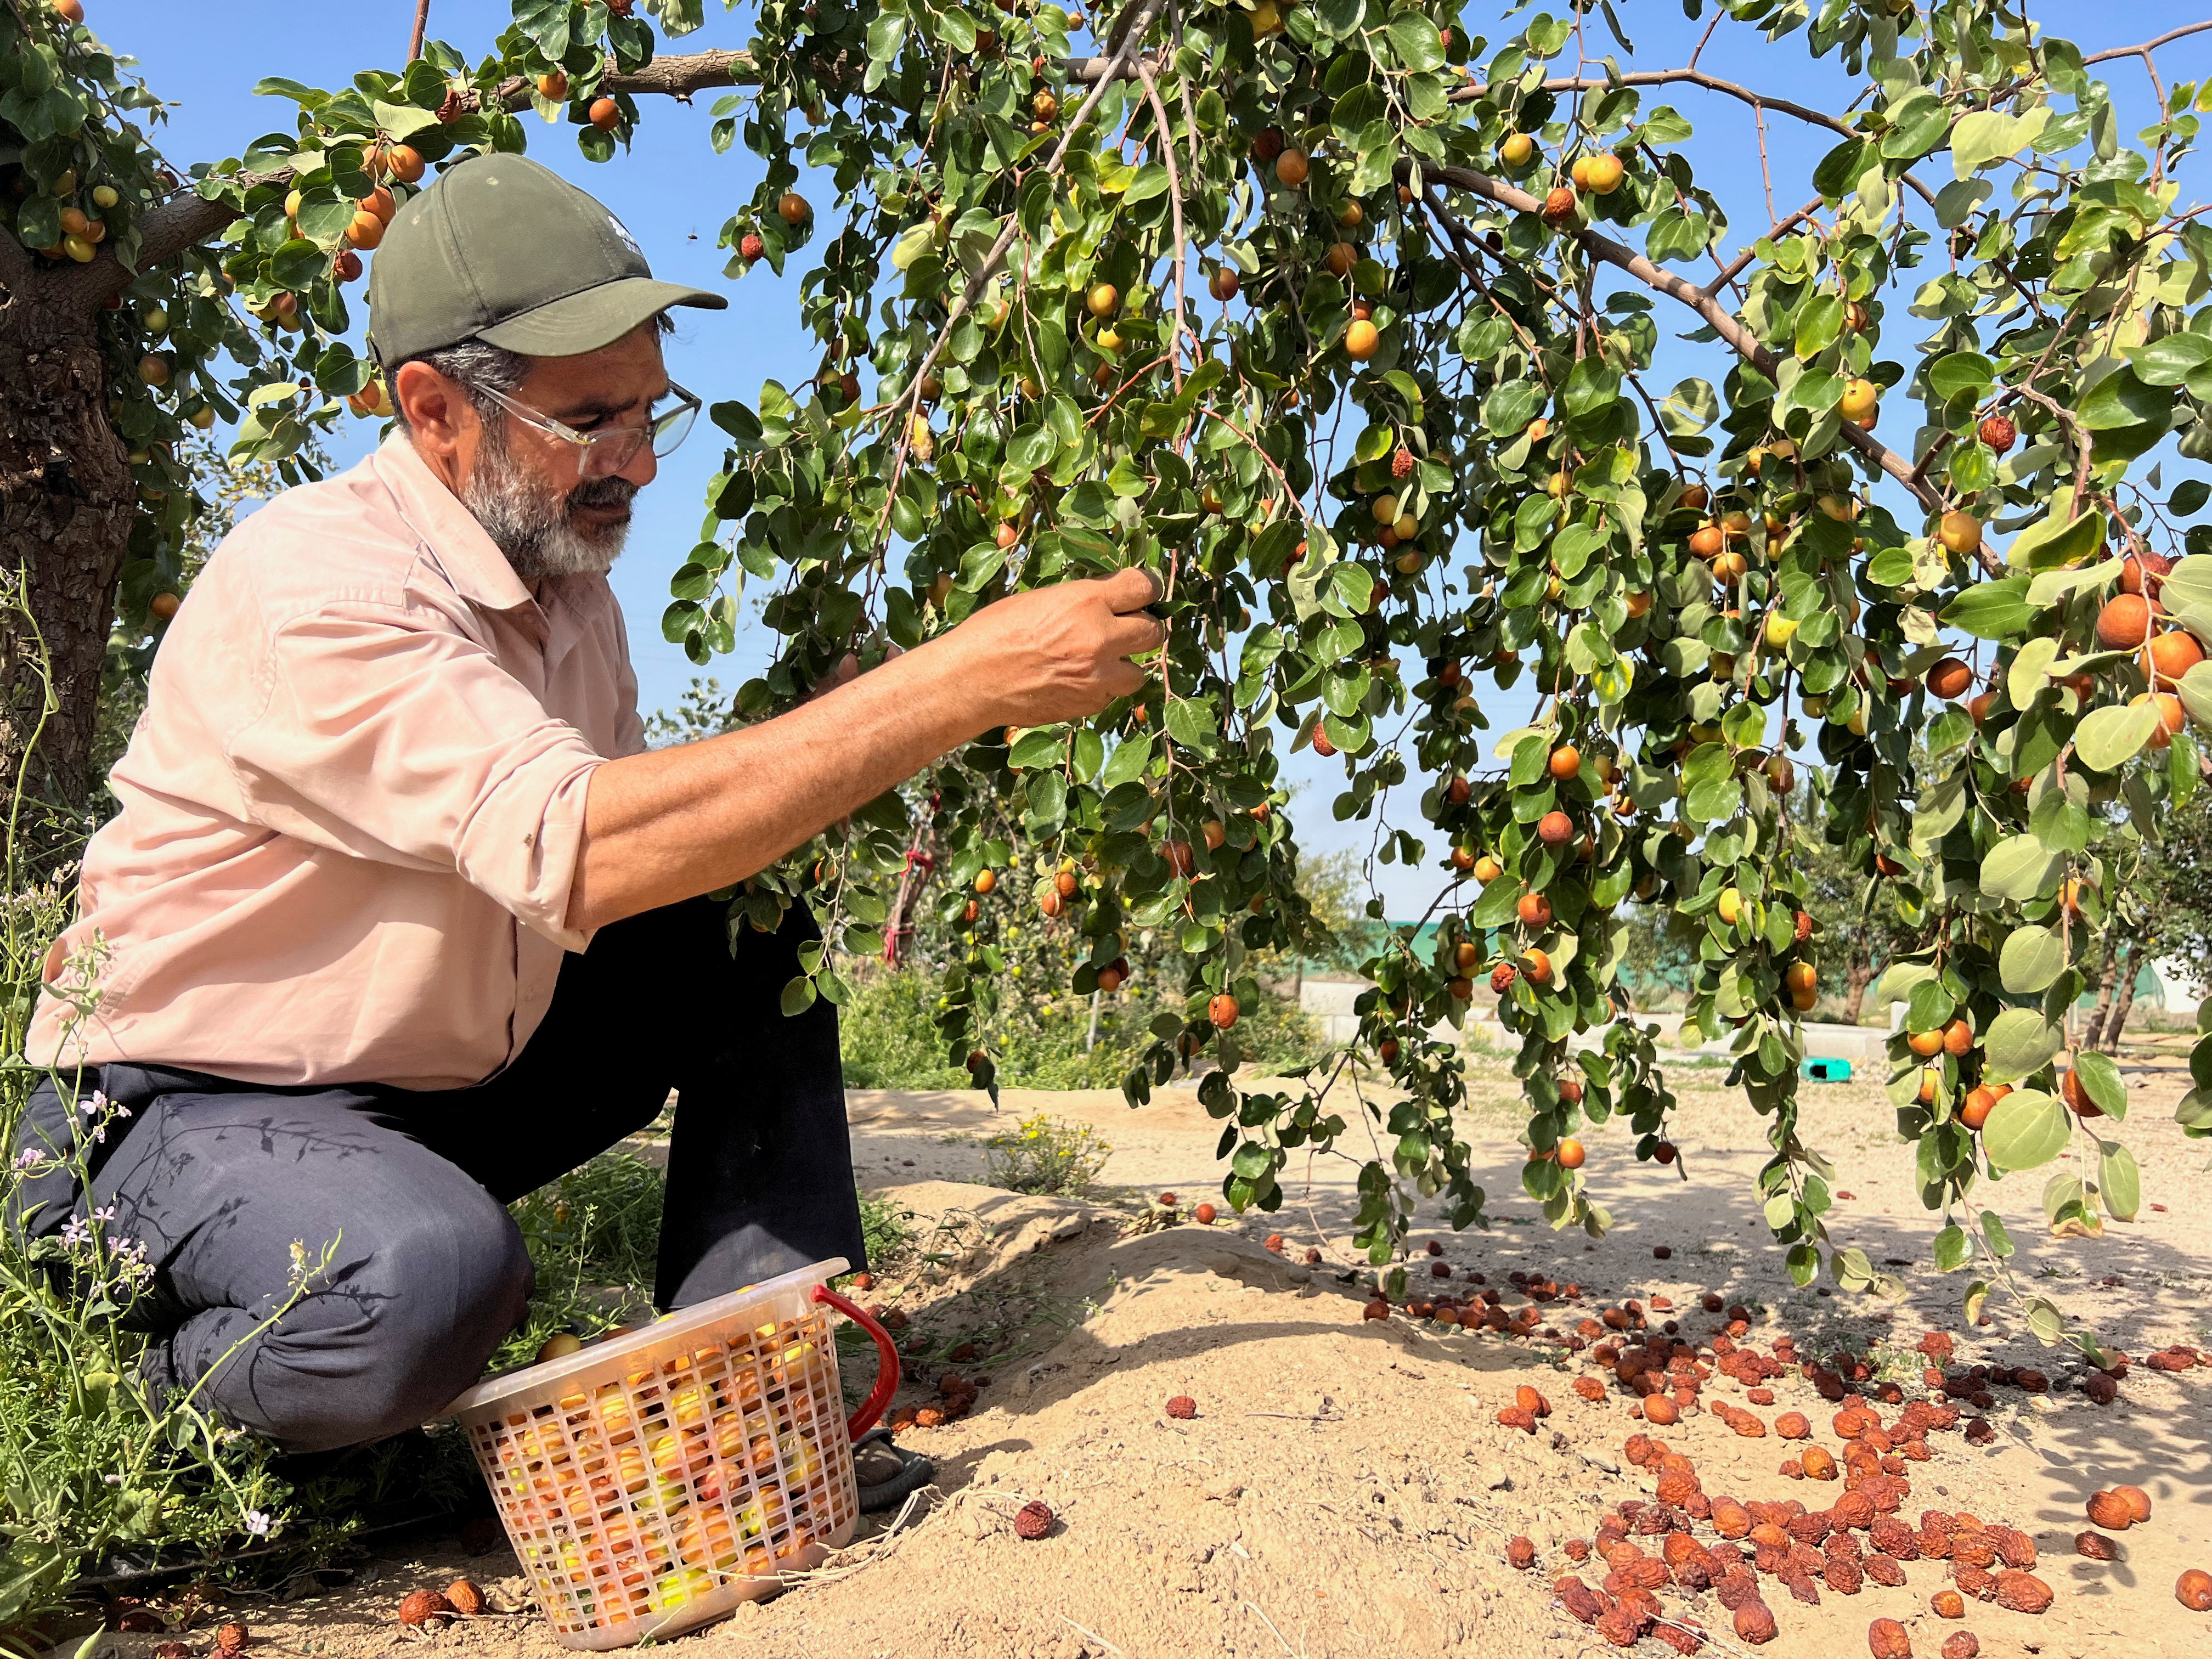 Iraqi farmer Ismail Ibrahim has planted "sidr", or jujube, trees which require far less water during an irrigation crisis, in Basra